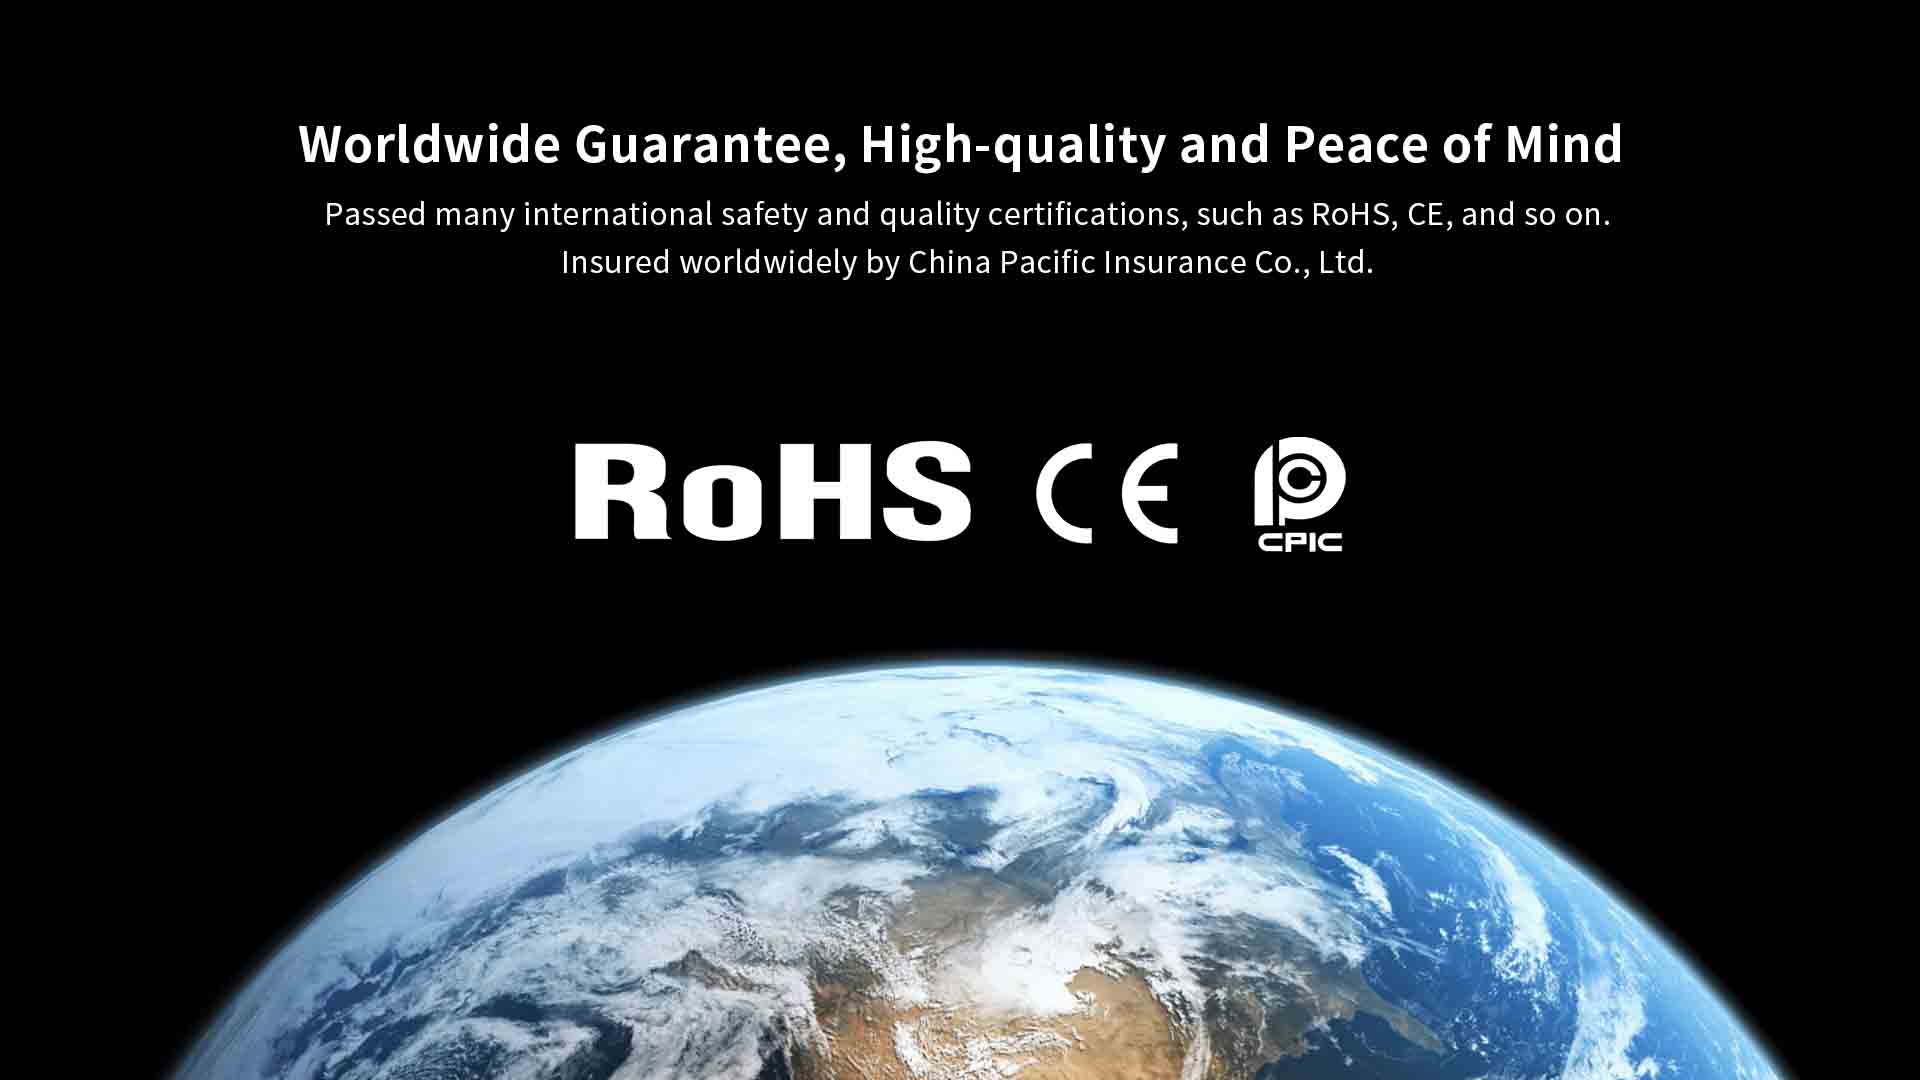 It gain international safety and quality certifications.